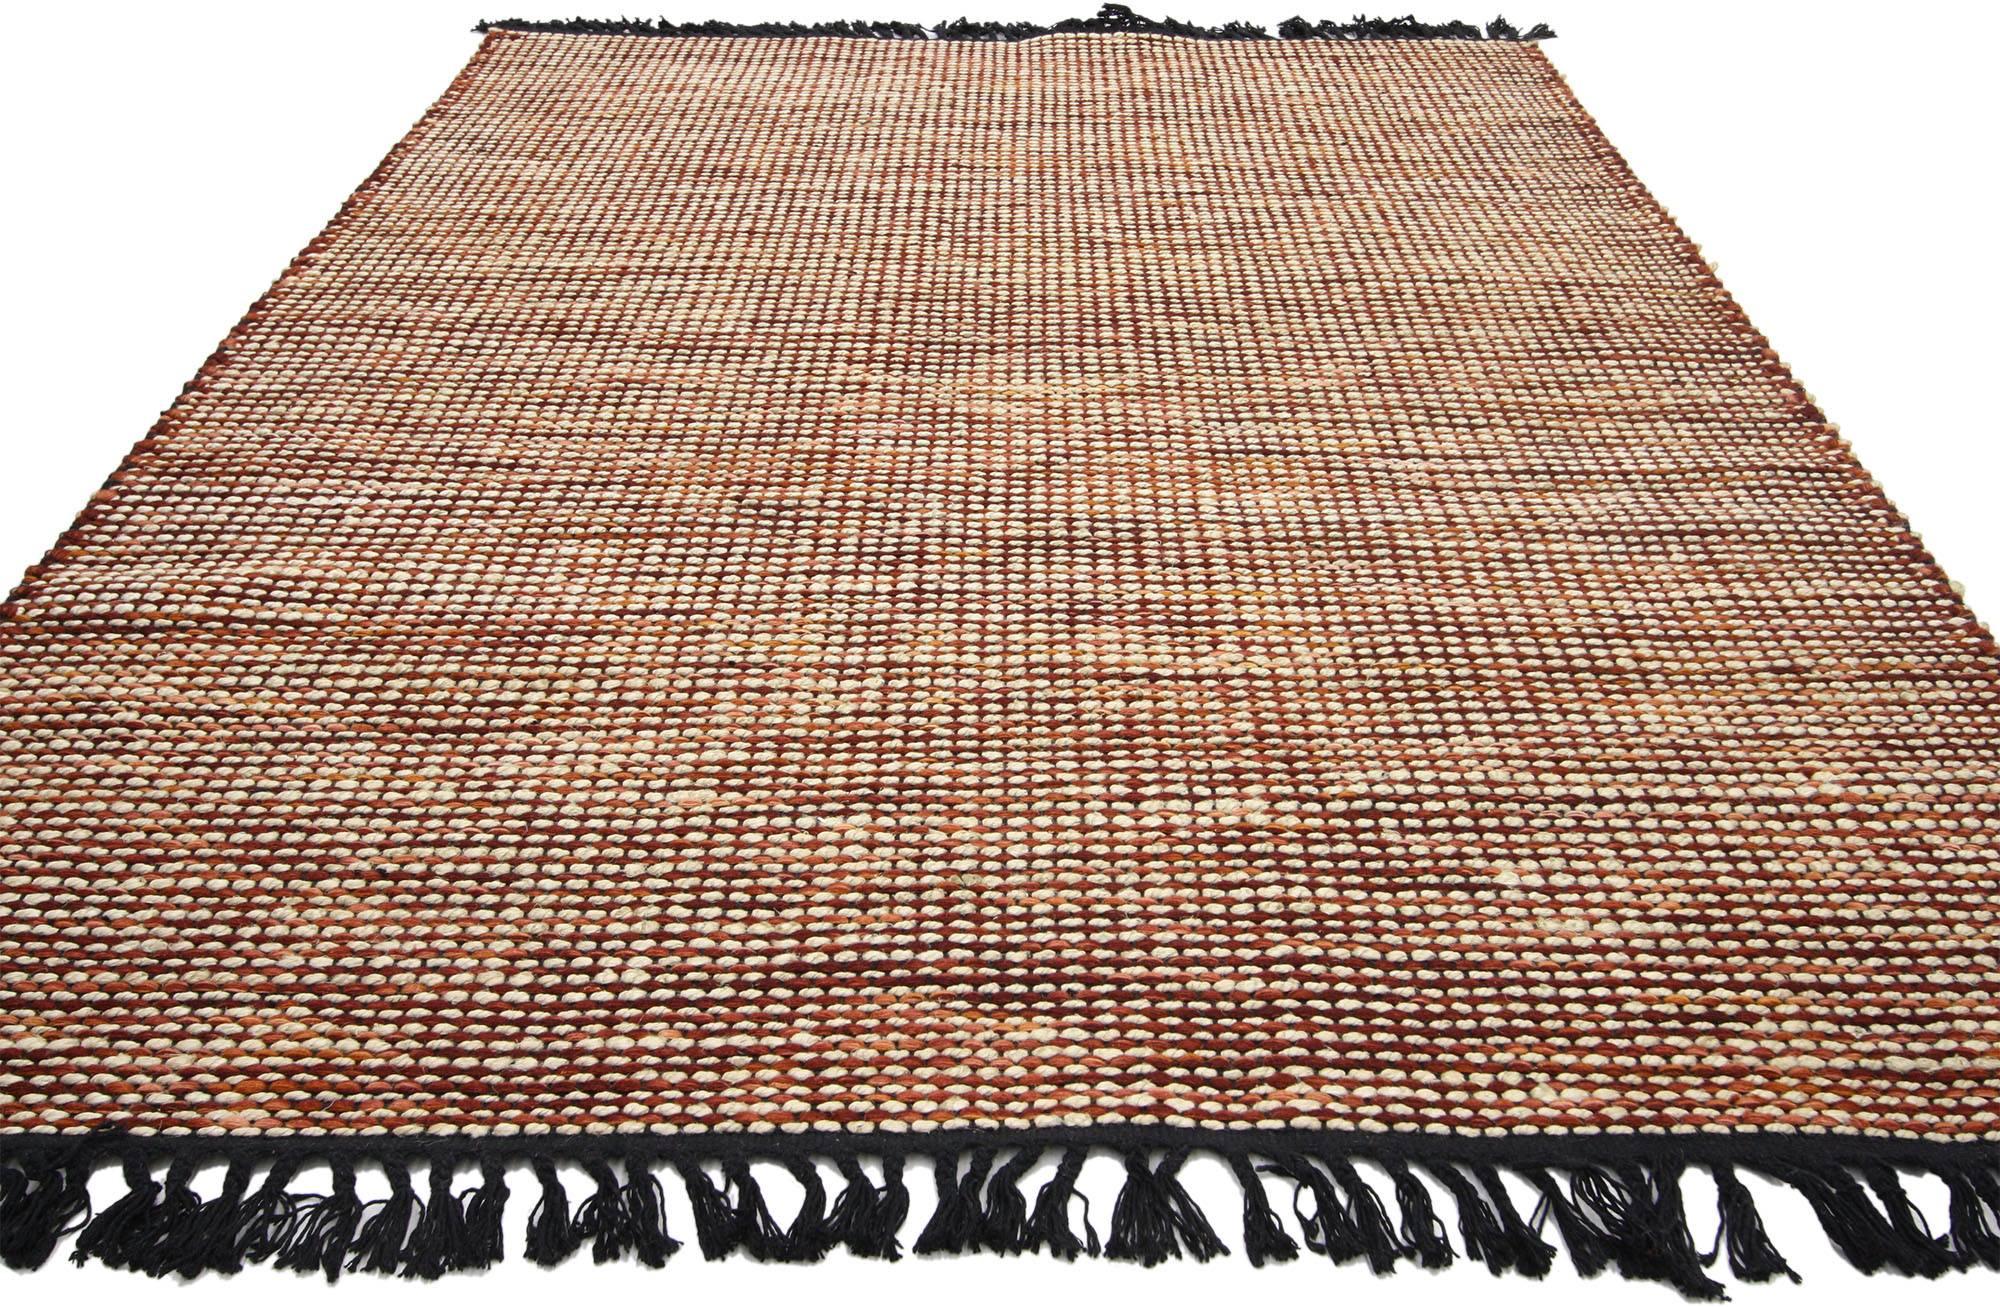 30378, New Modern Lake House Cabin Style Dhurrie flat-weave rug. Freshen up your space and inject color without going poly-chrome crazy with this modern Dhurrie area rug. Subtle in style and very versatile, this Lake House style rug features a